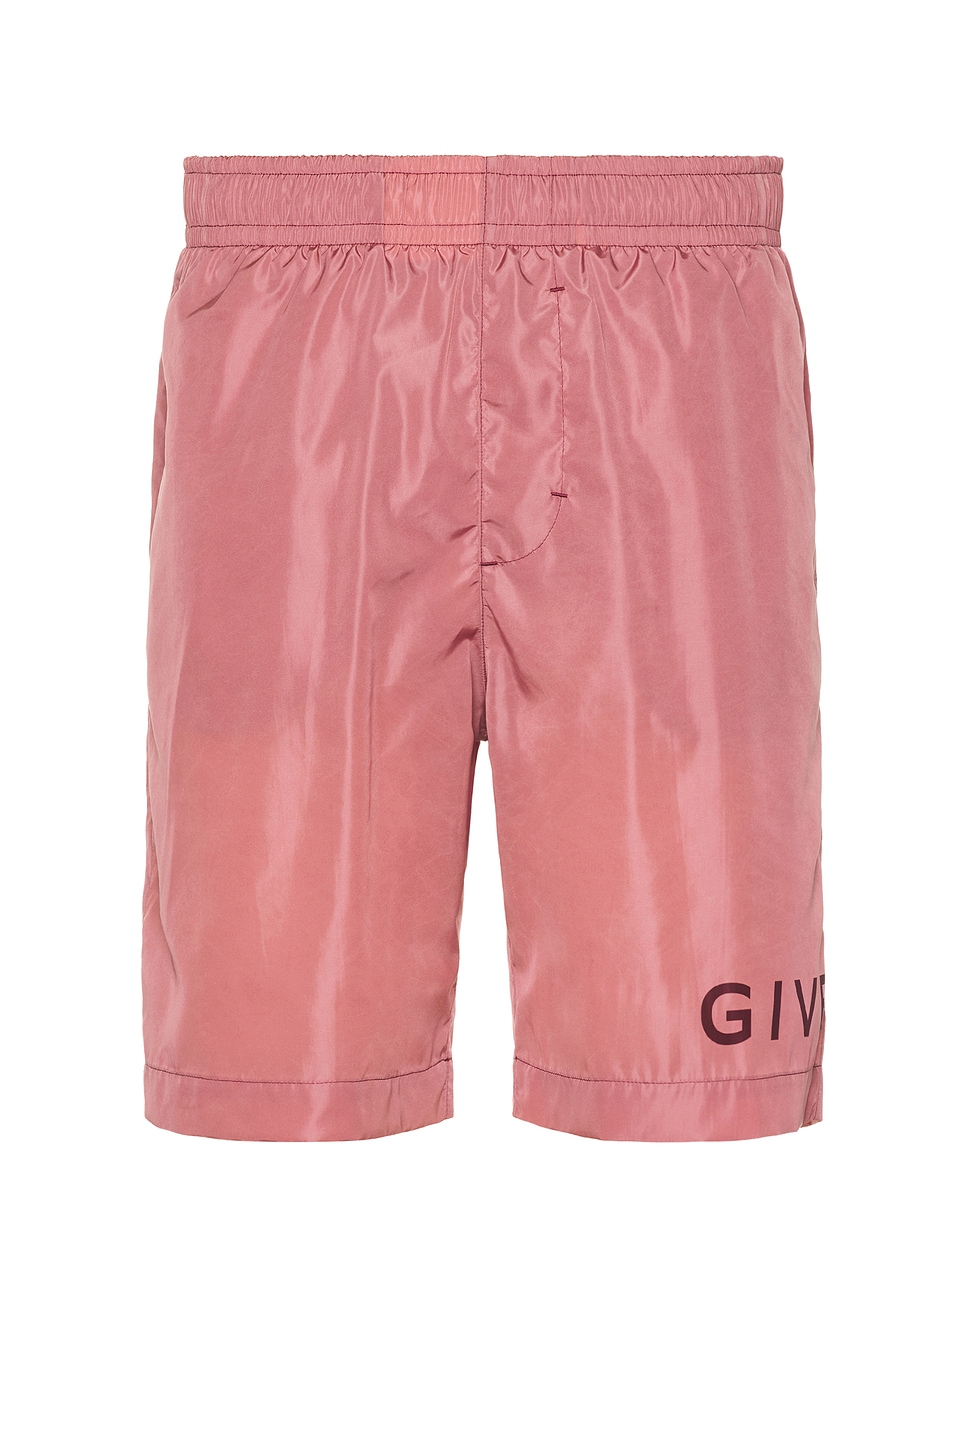 Givenchy Long Swimshorts In Old Pink